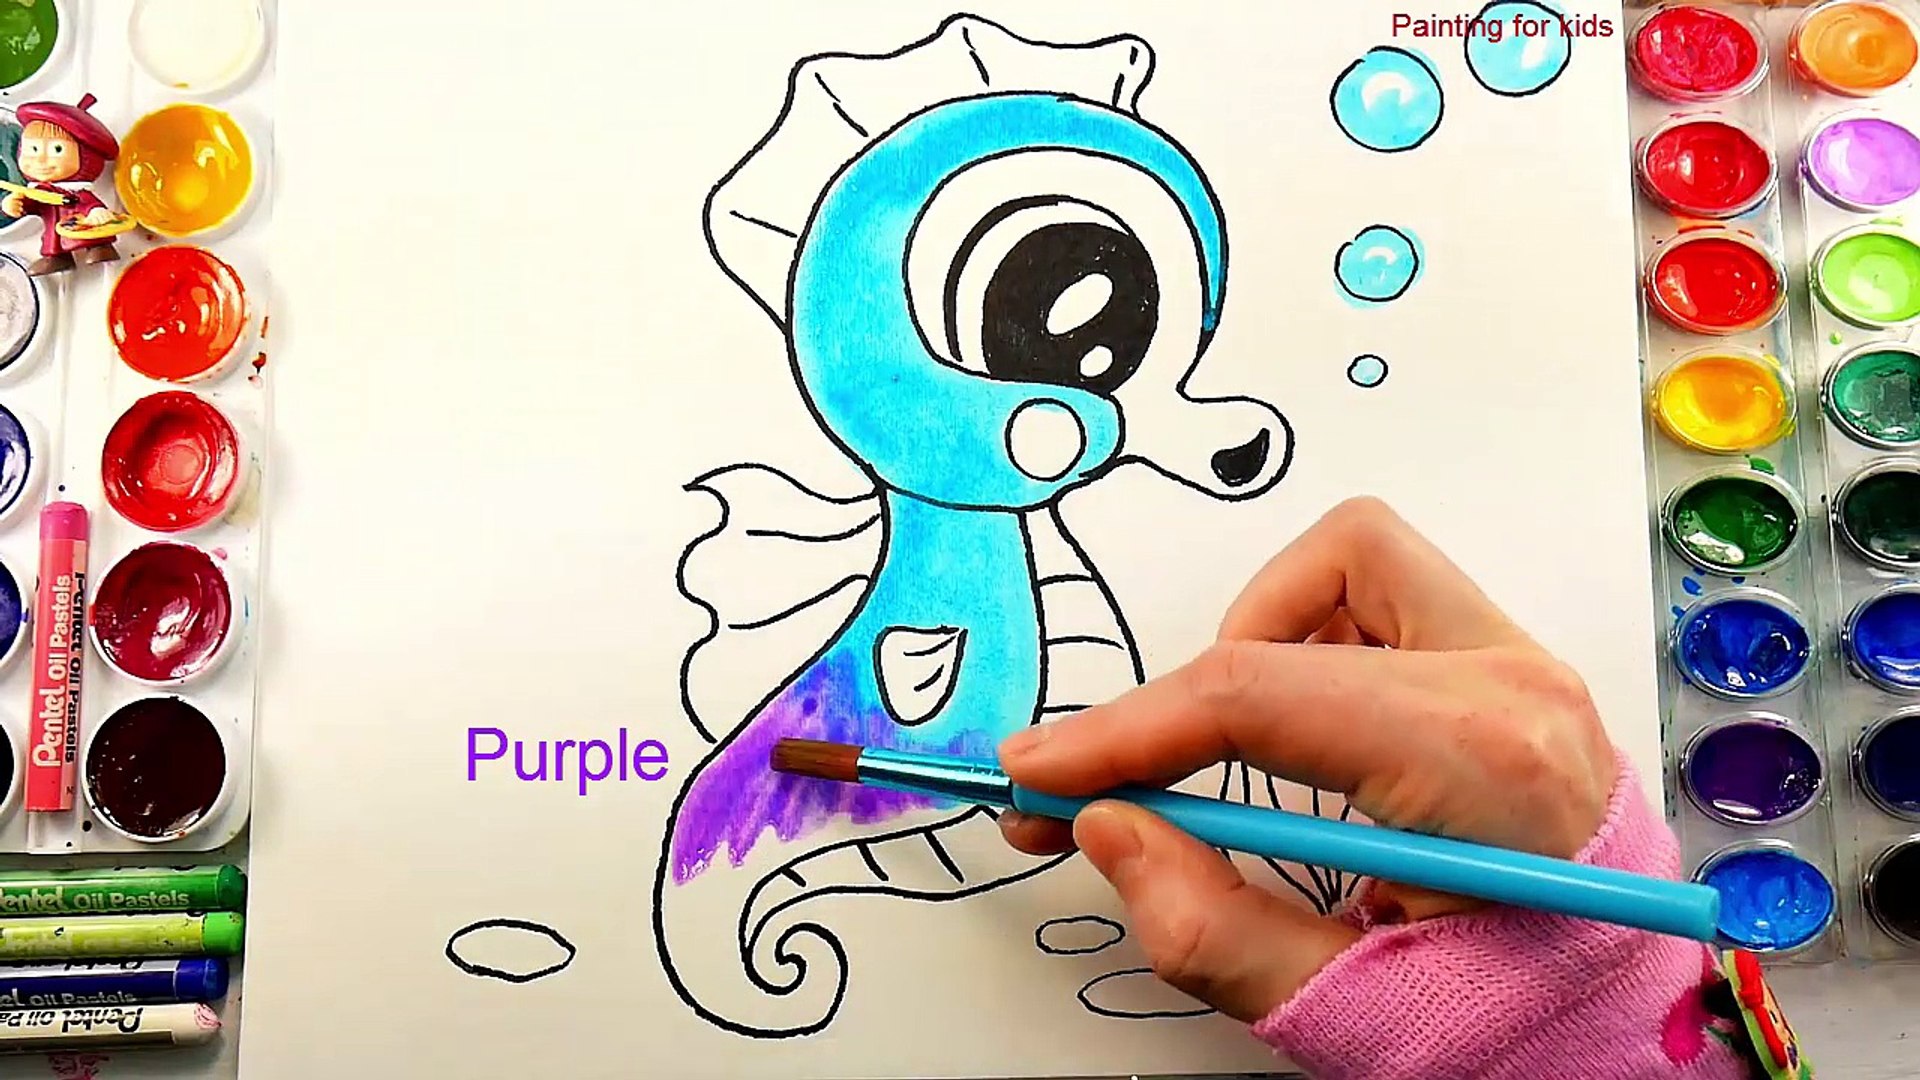 How To Draw Seahorse Video for Kids To Learn Coloring - painting for kids